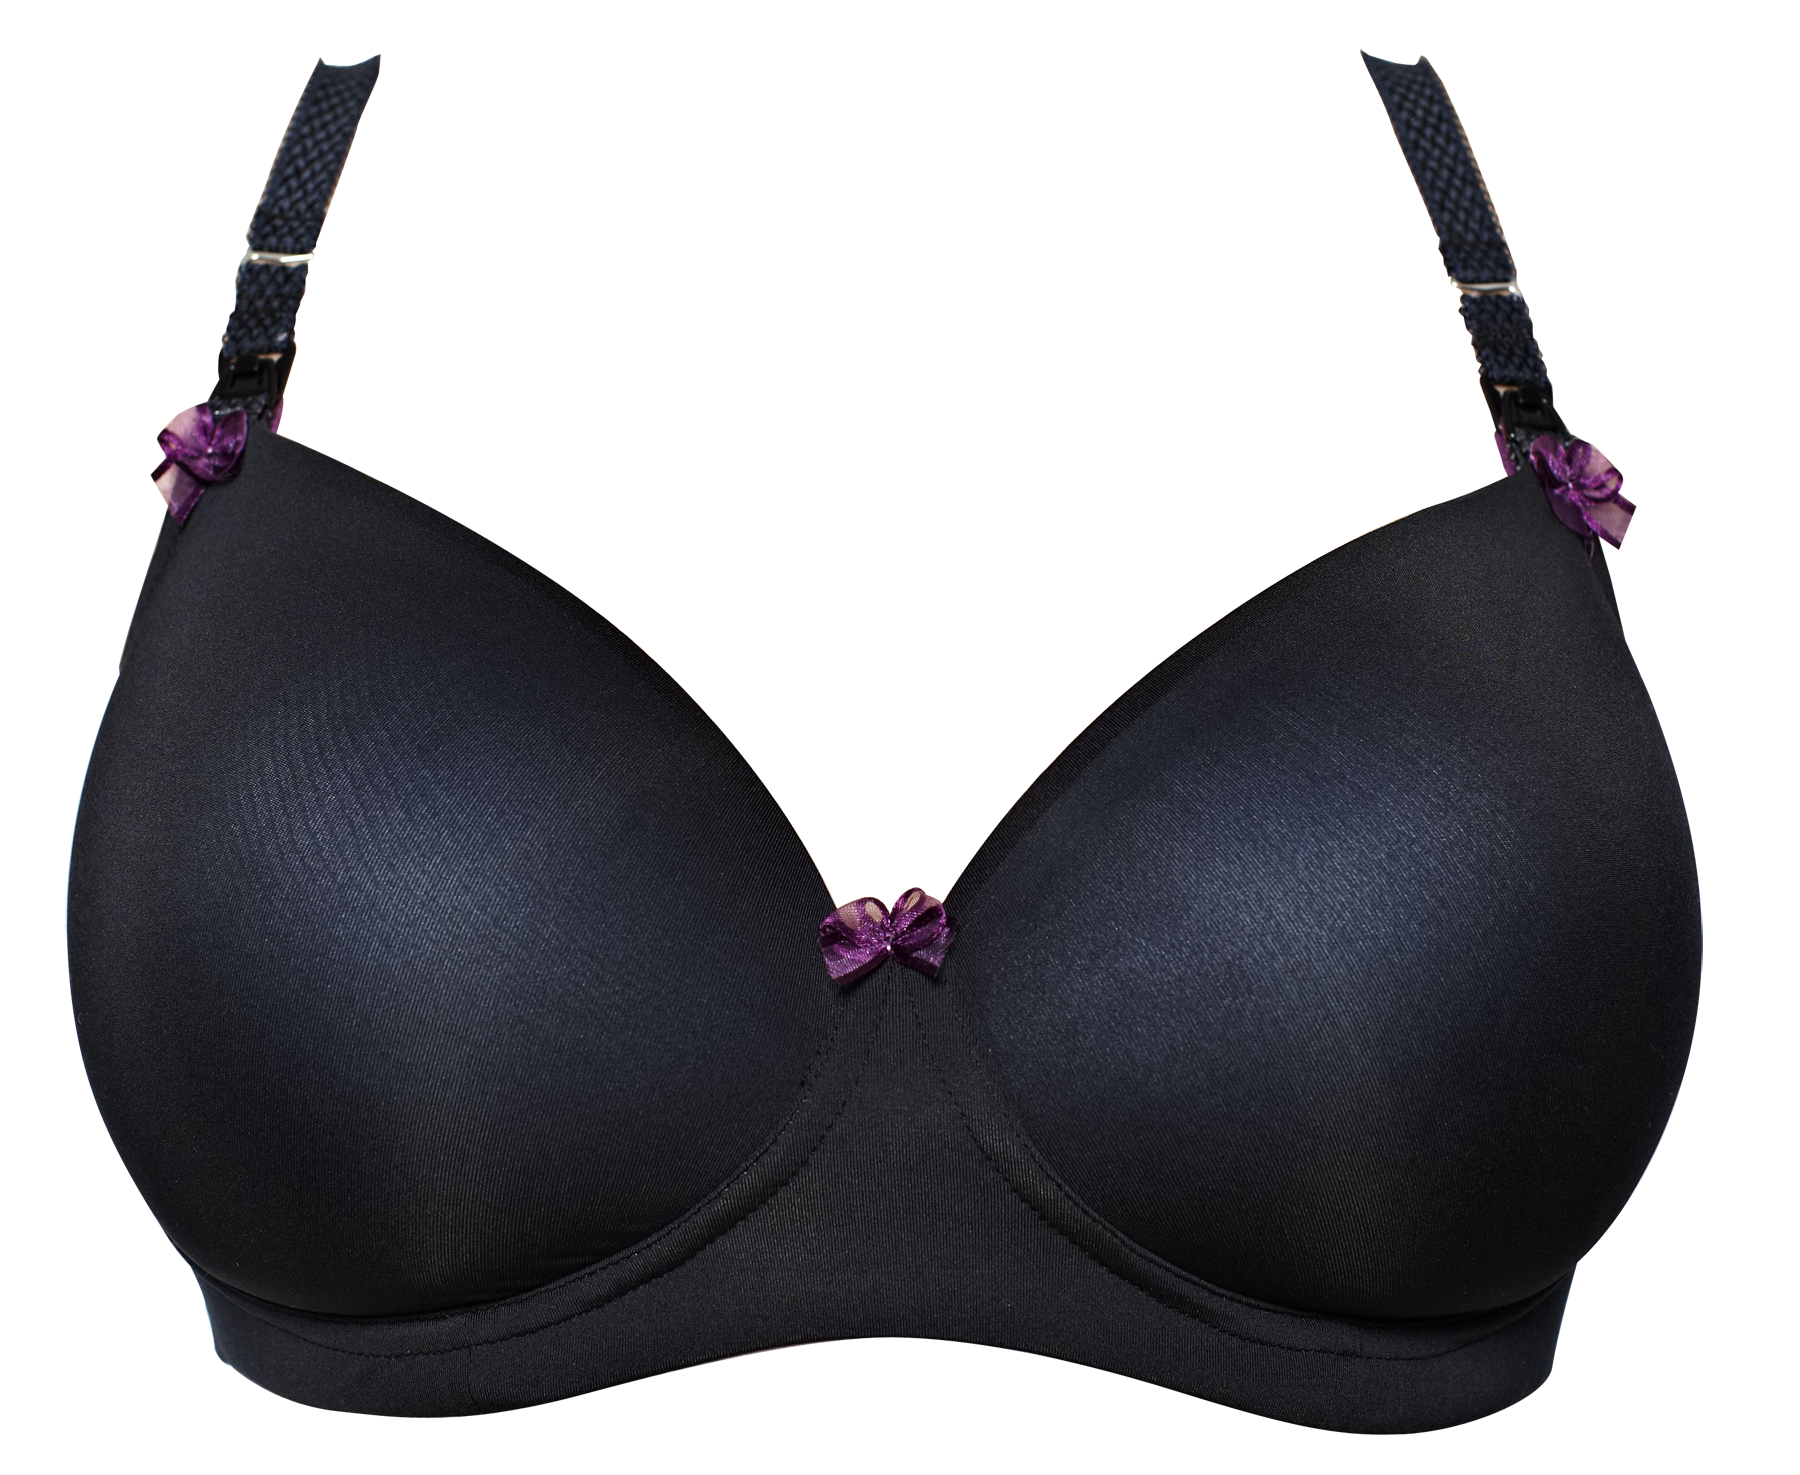 https://www.pngplay.com/wp-content/uploads/15/Black-Bra-PNG-HD-Quality.png